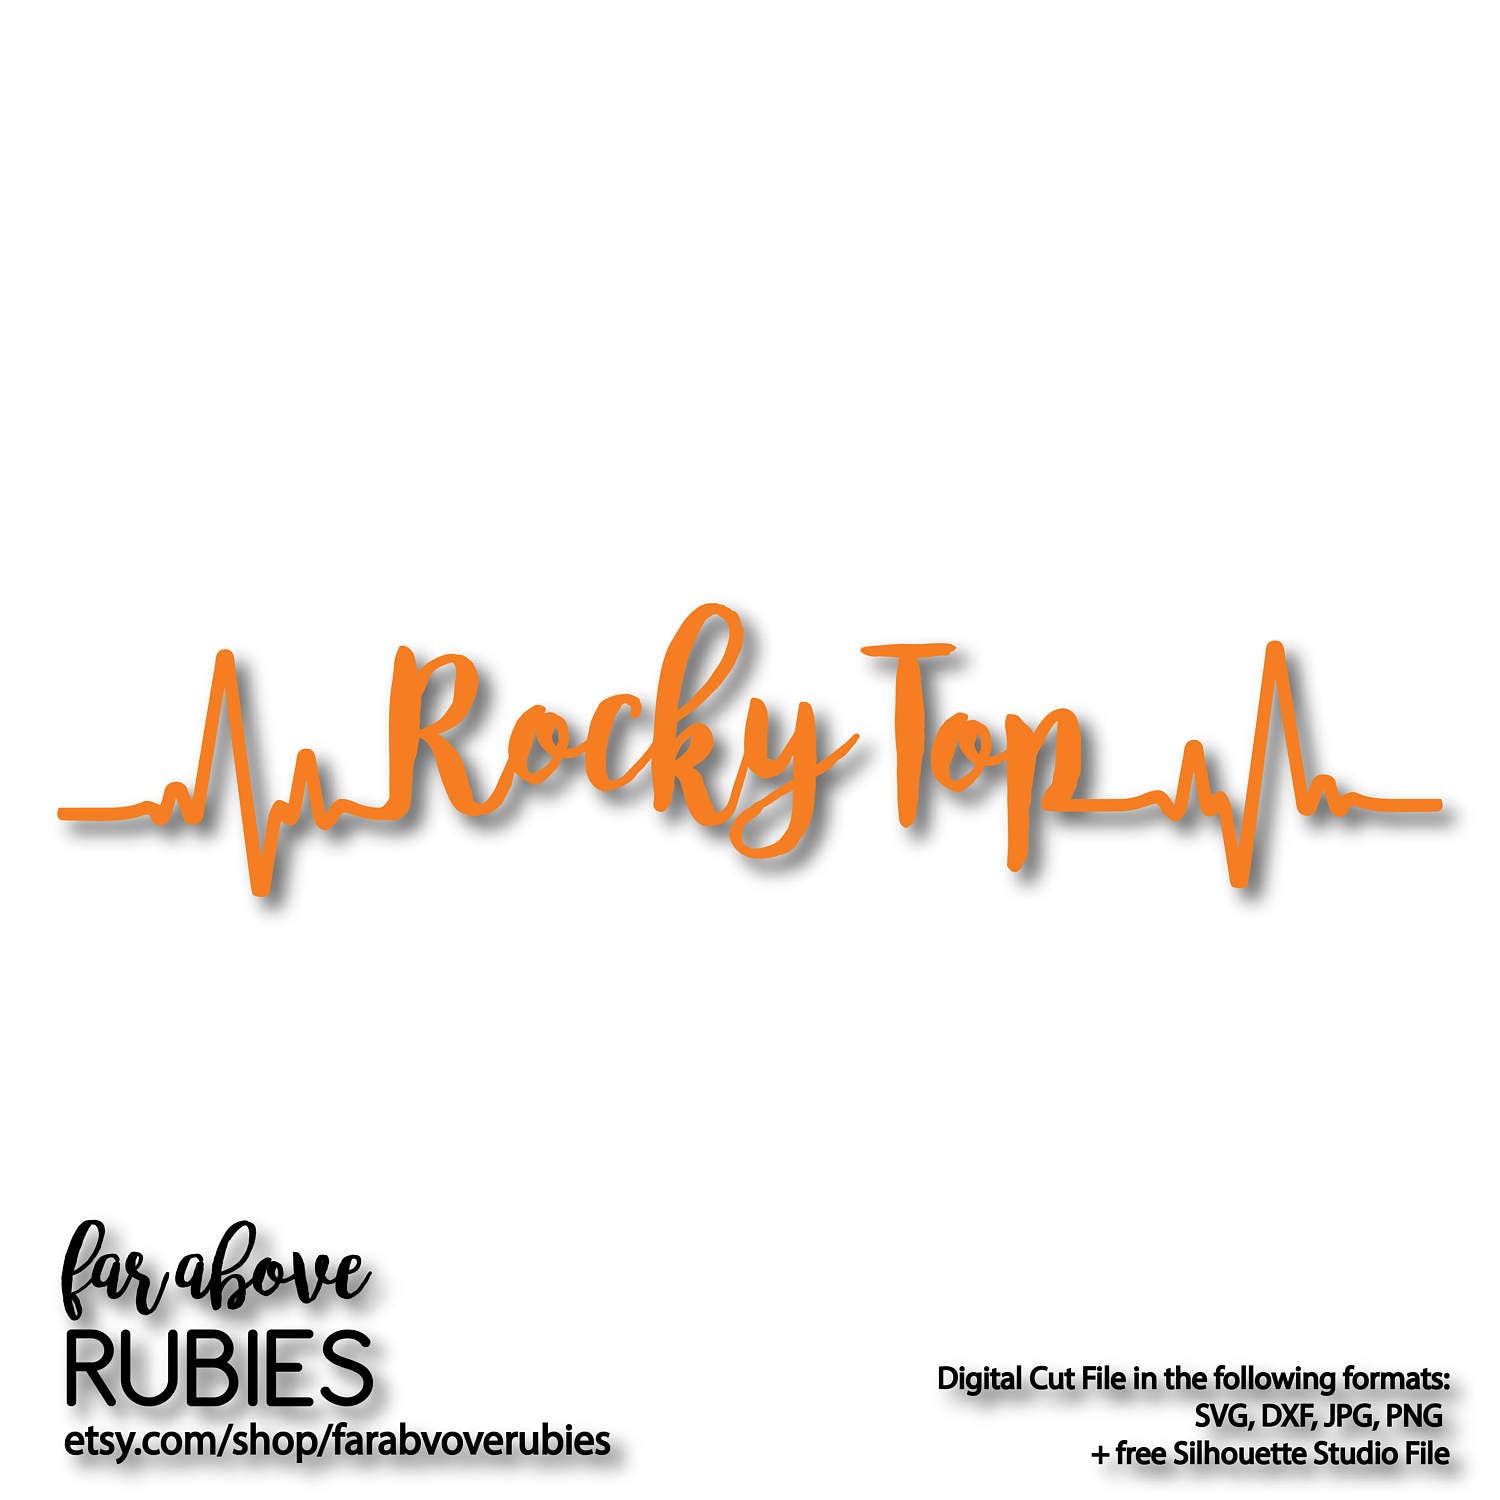 Download Rocky Top Tn Tennessee Heartbeat EKG SVG EPS dxf png jpg